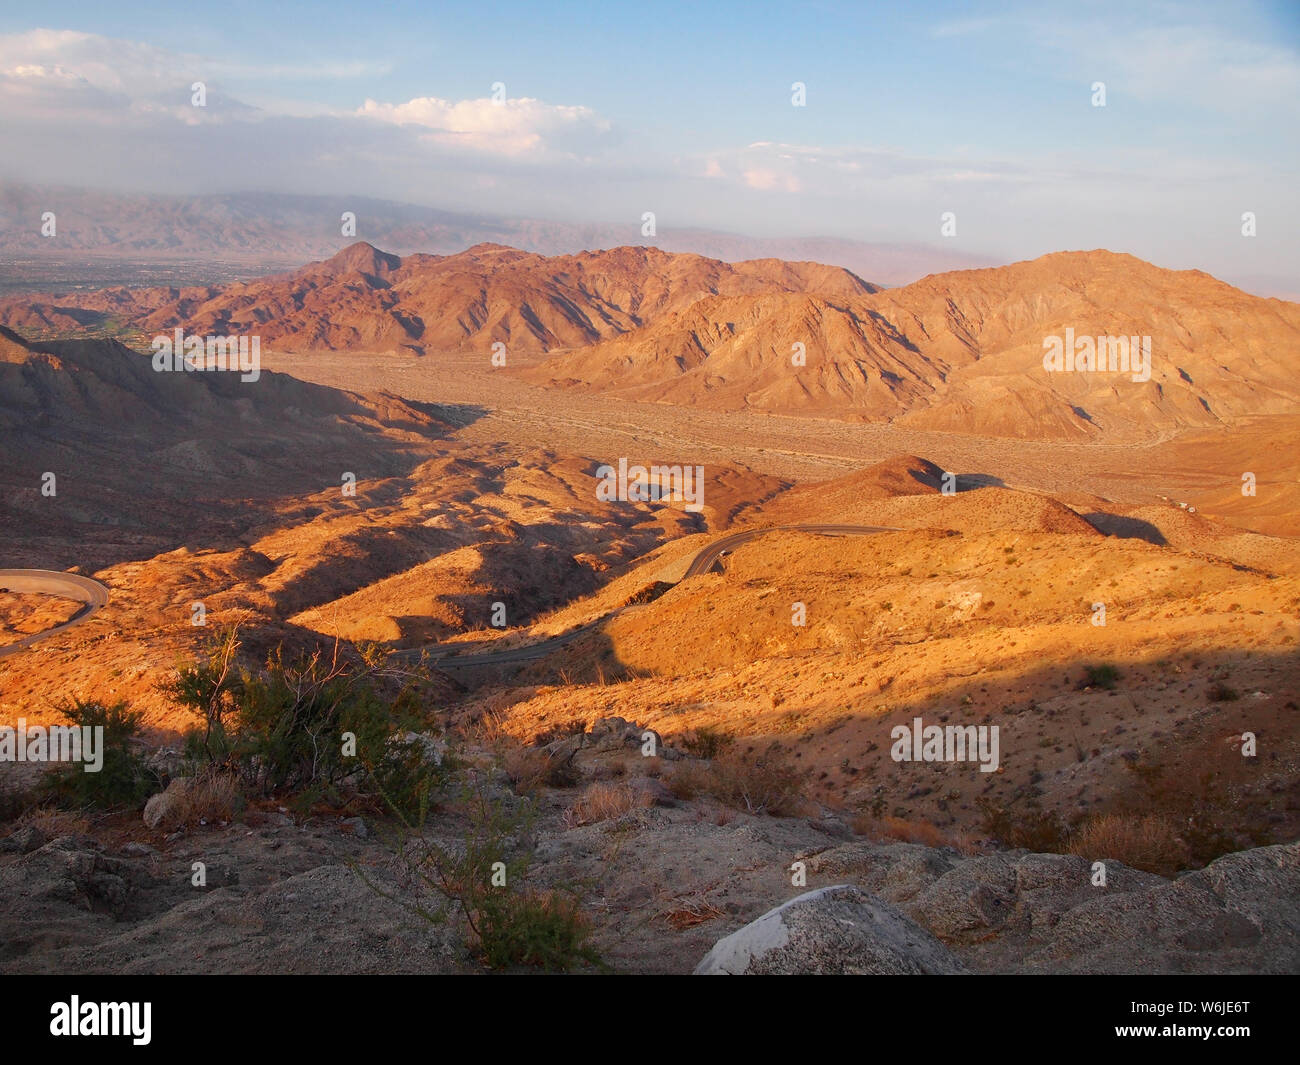 Looking down into the Coachella Valley, from a scenic overlook in the Palms Springs area of southern California, USA. Stock Photo